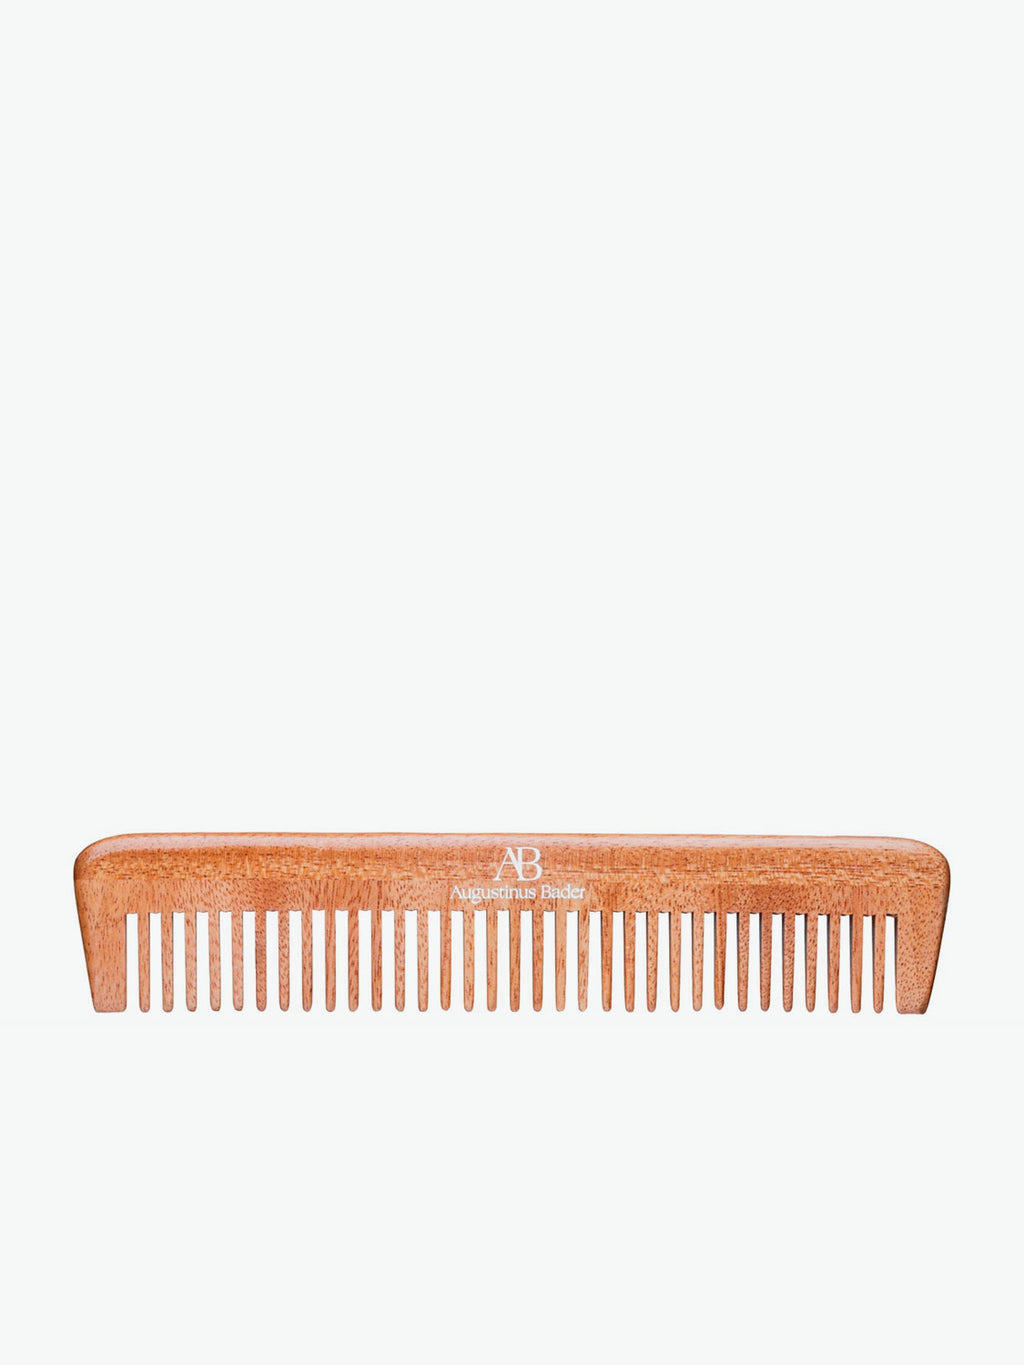 Augustinus Bader The Neem Comb Without Handle